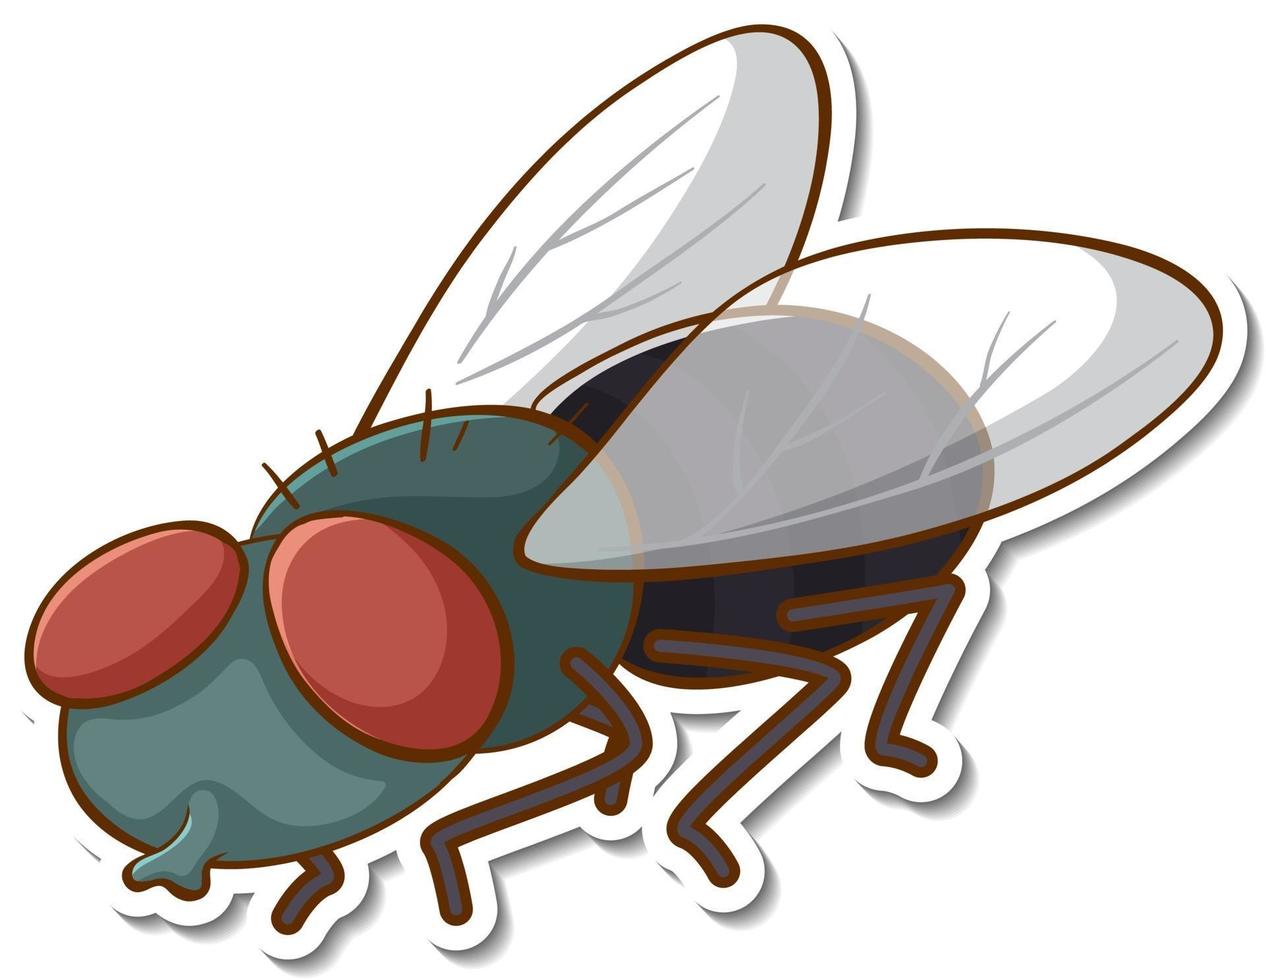 Sticker design with fly insect isolated vector